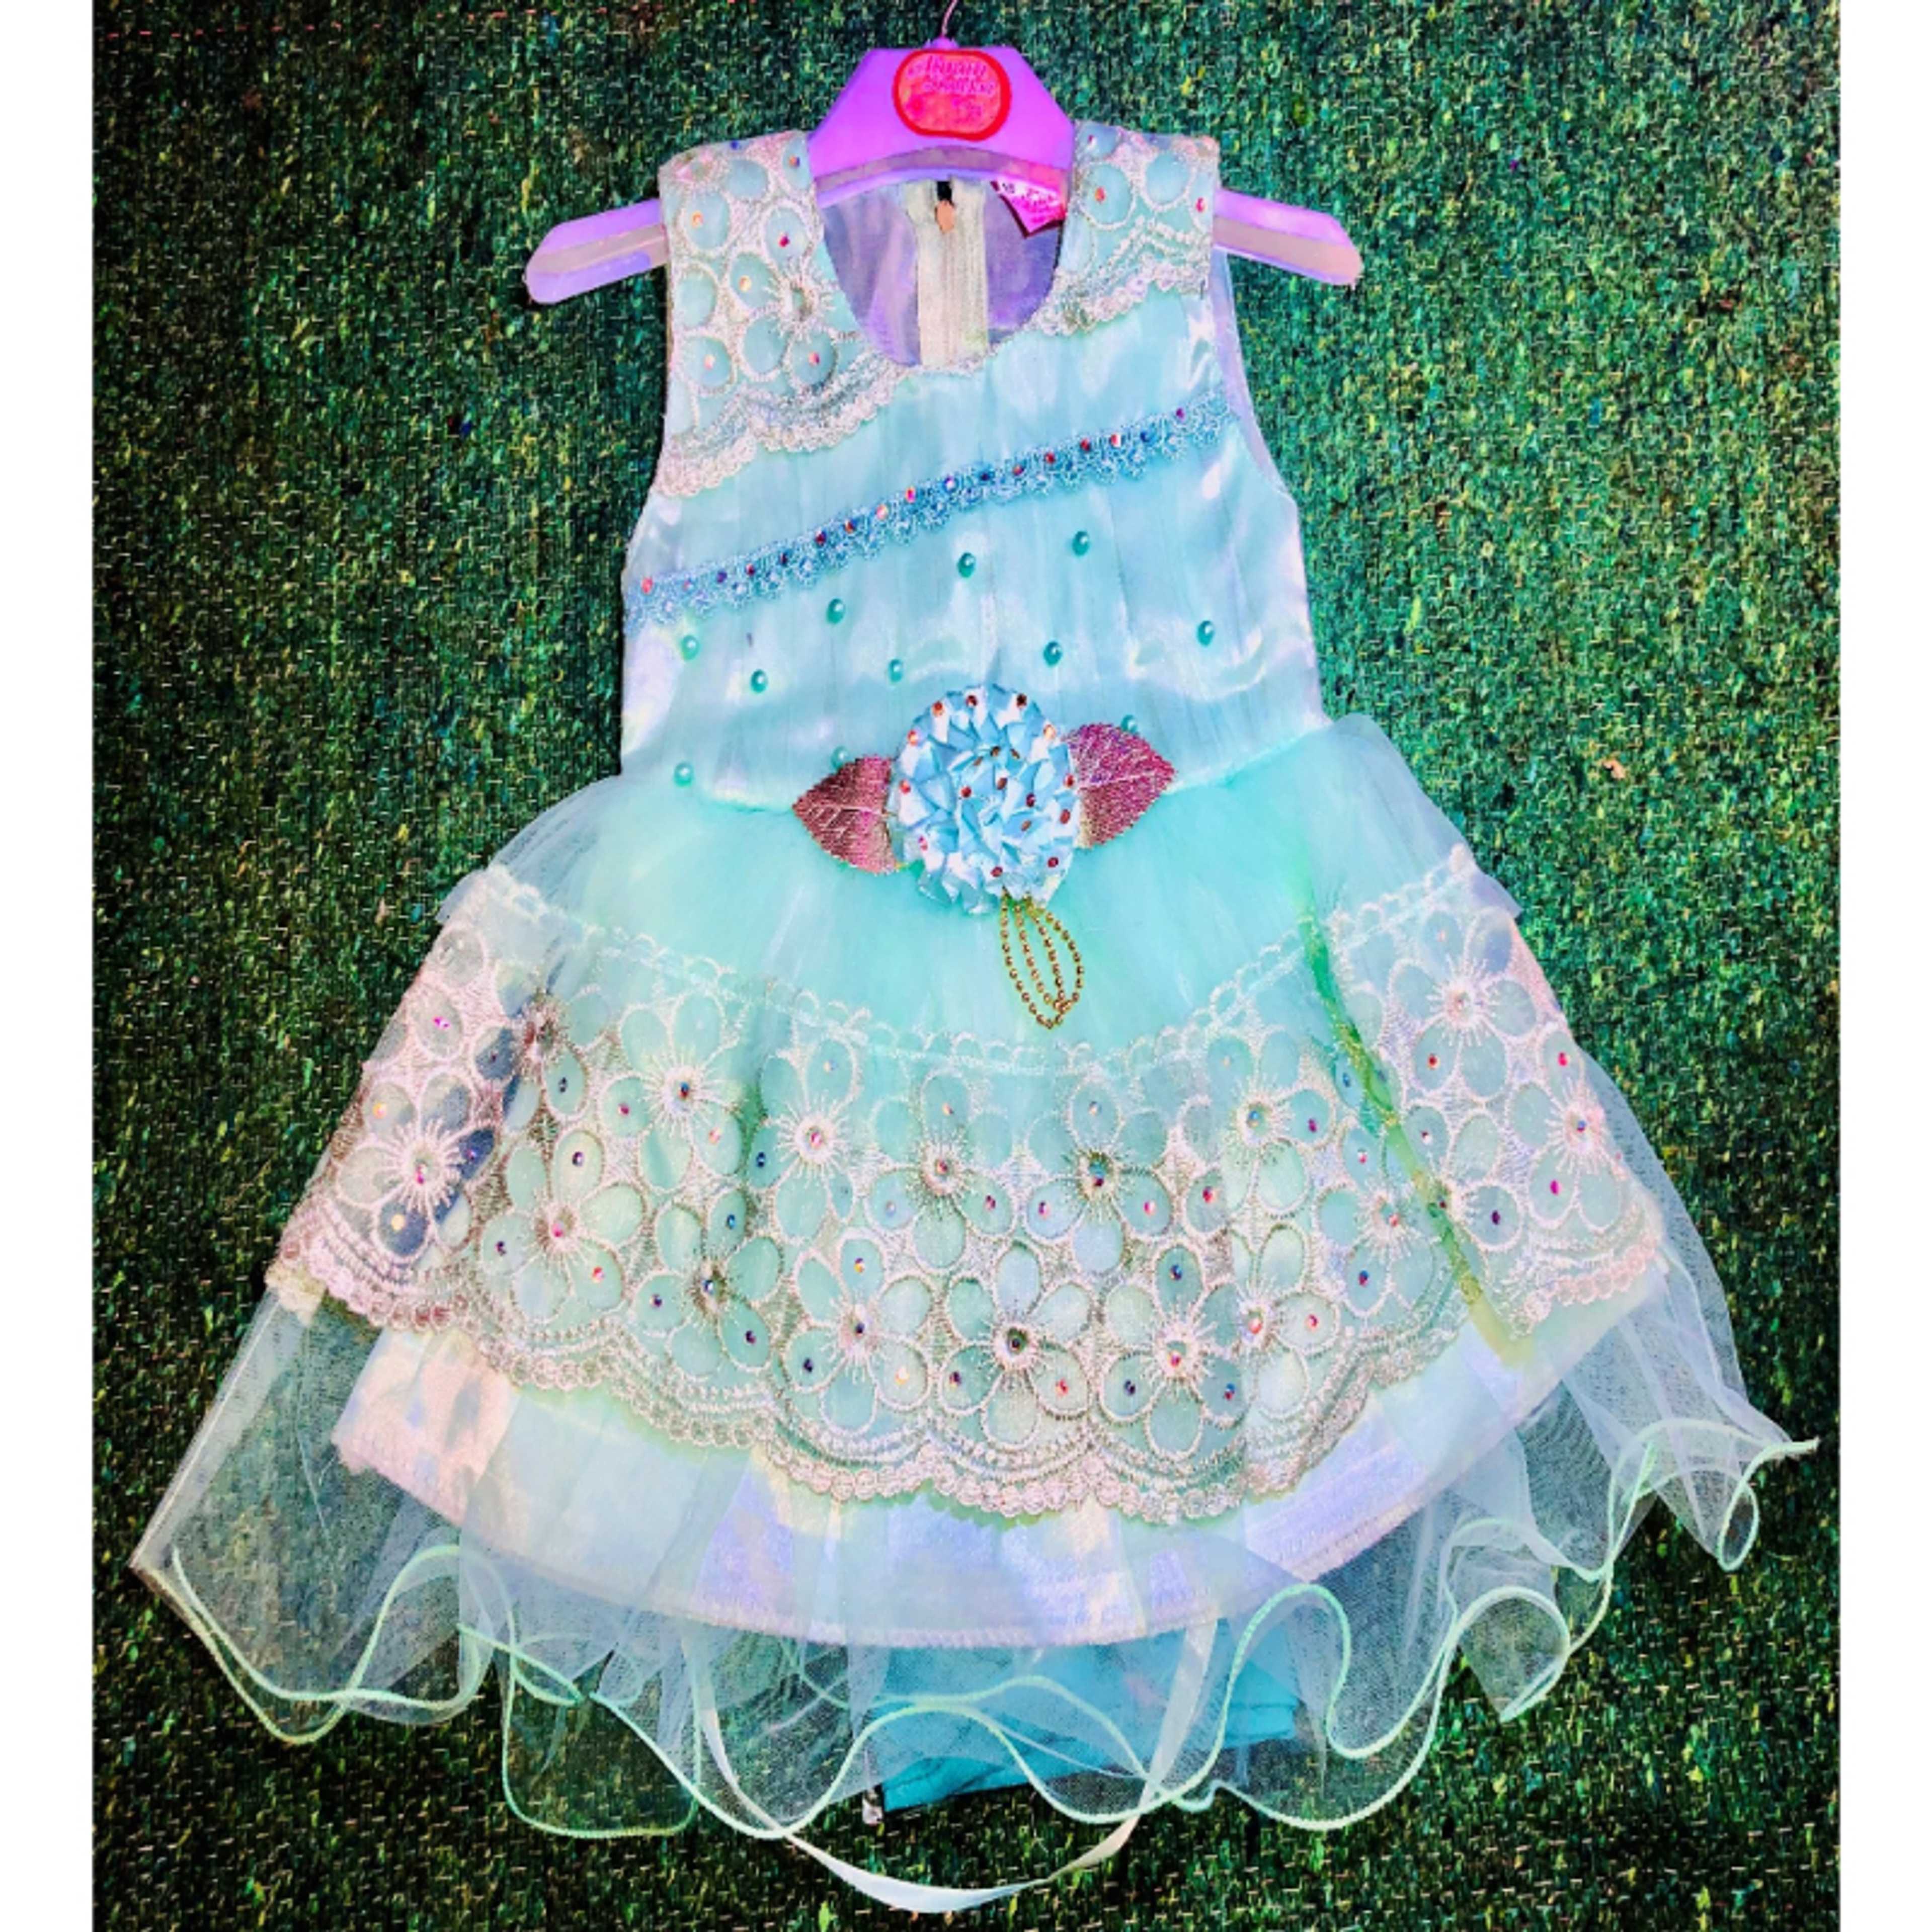 Toddler Infant Kids Baby Girls Summer Dress Party Dress 0-3 years